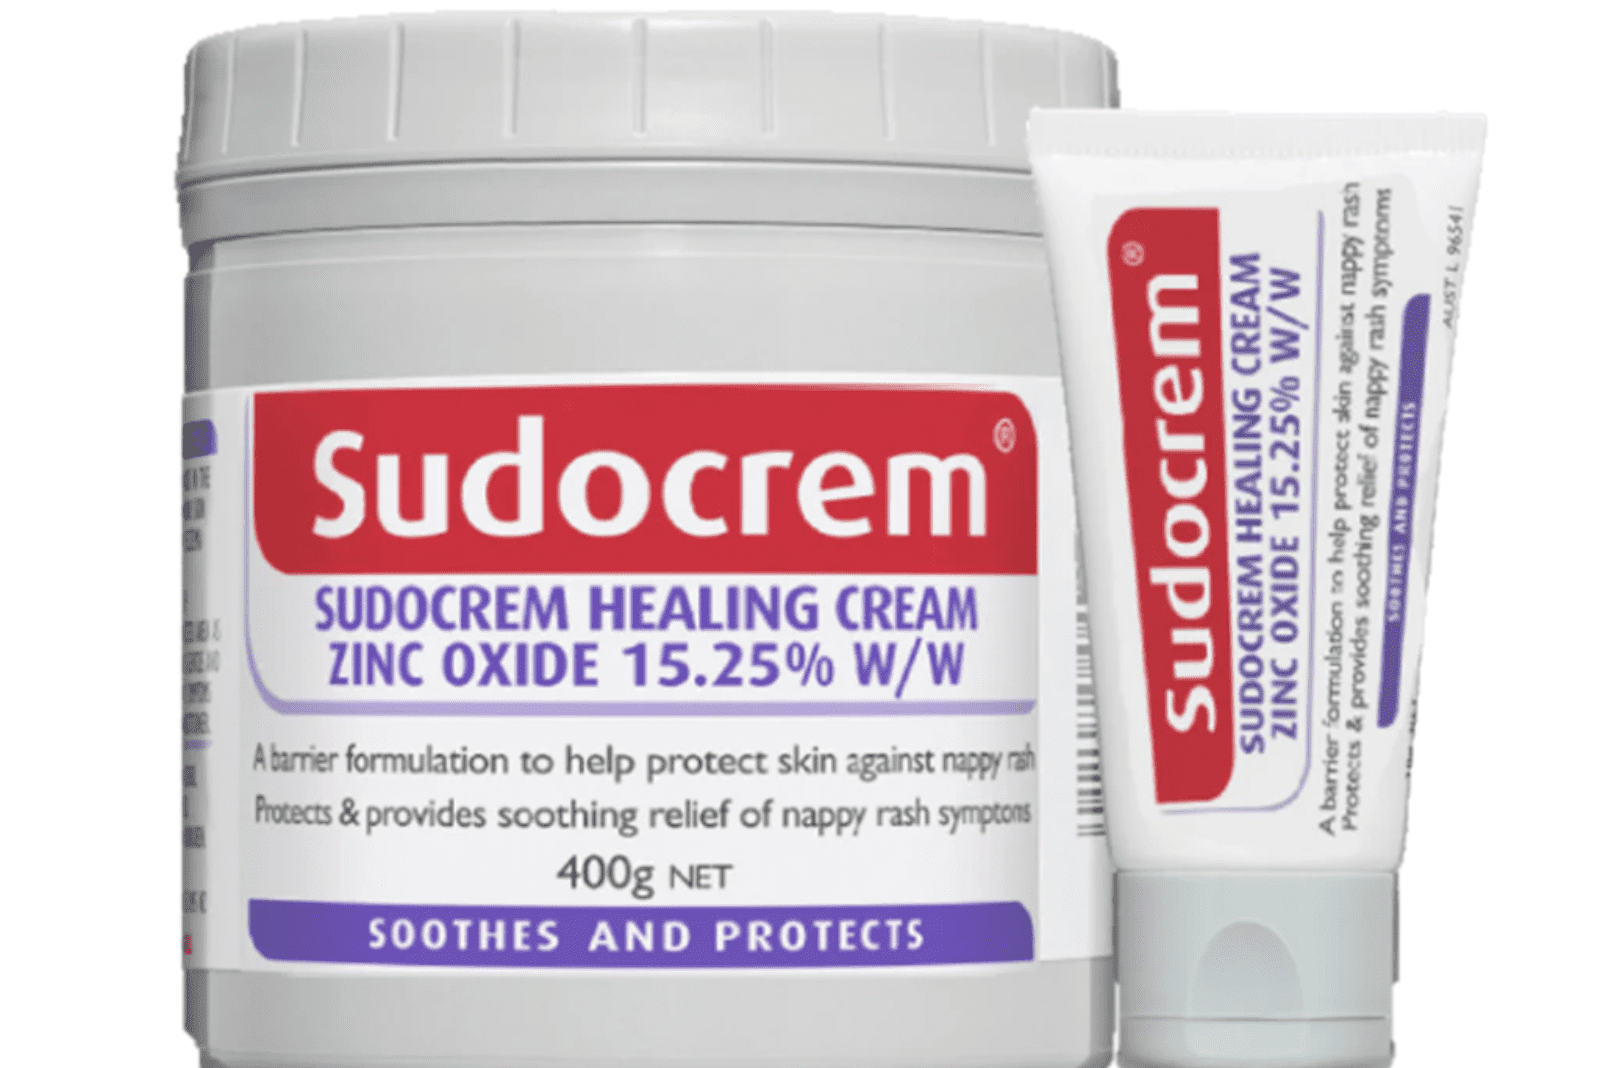 two packages of Sudocrem cream